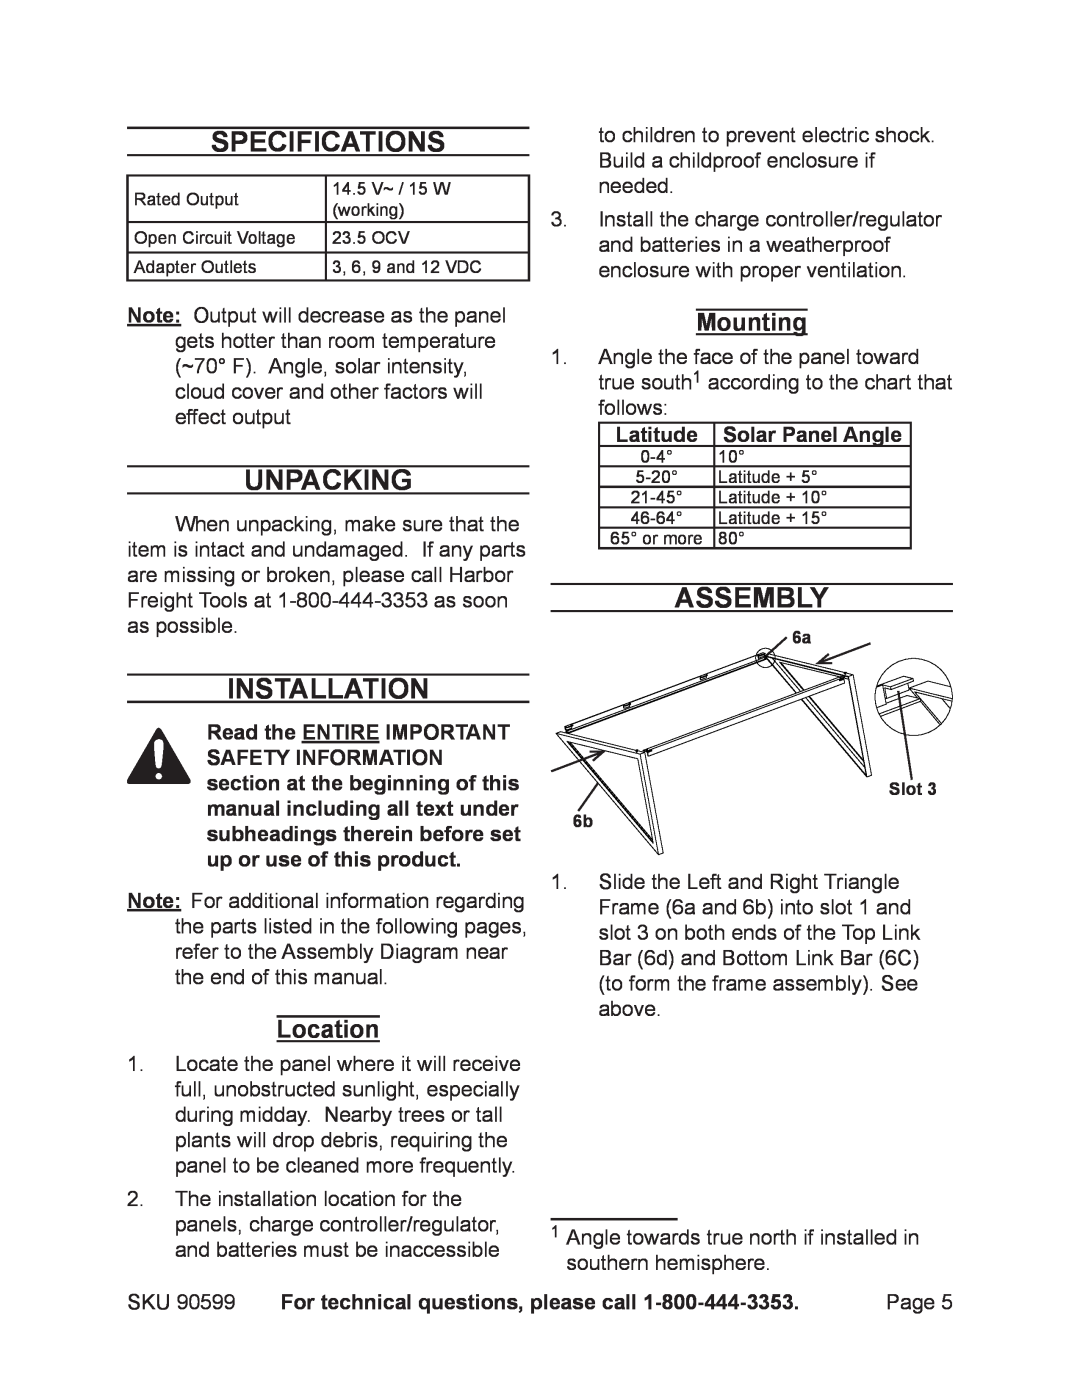 Chicago Electric 90599 manual Specifications, Unpacking, Assembly, Installation, Mounting, Location 